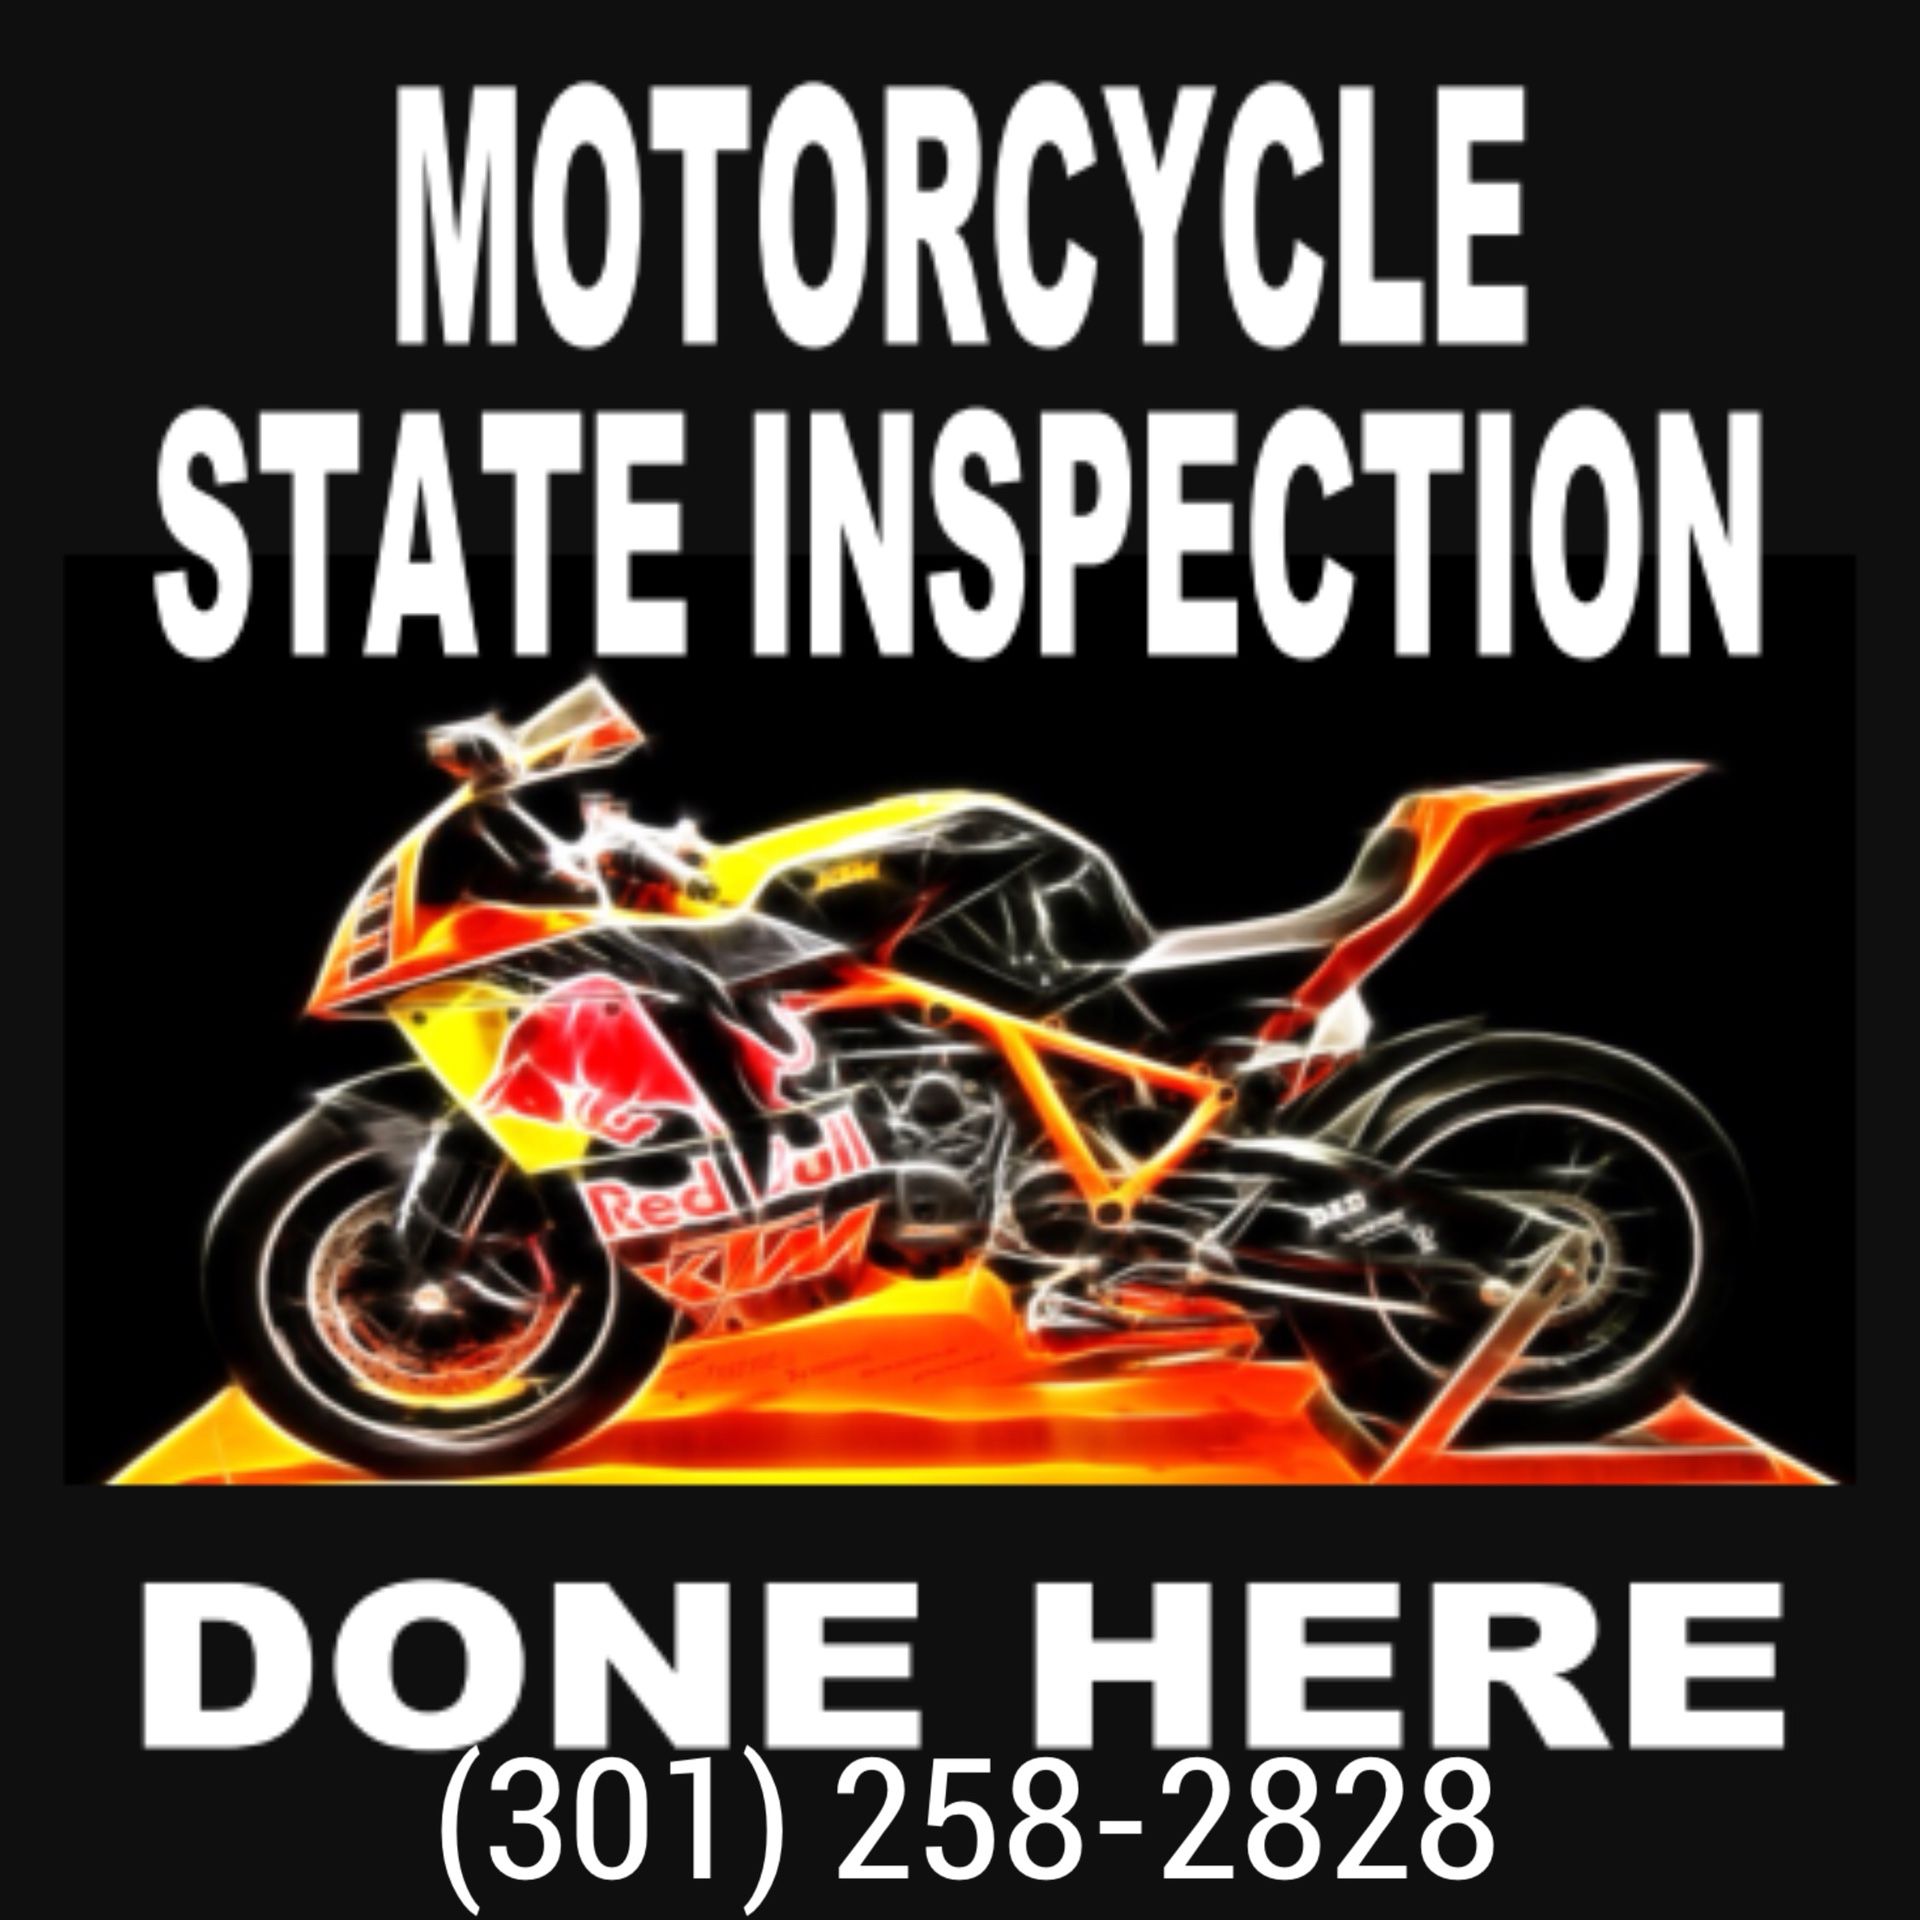 Maryland Motorcycle Inspection Service